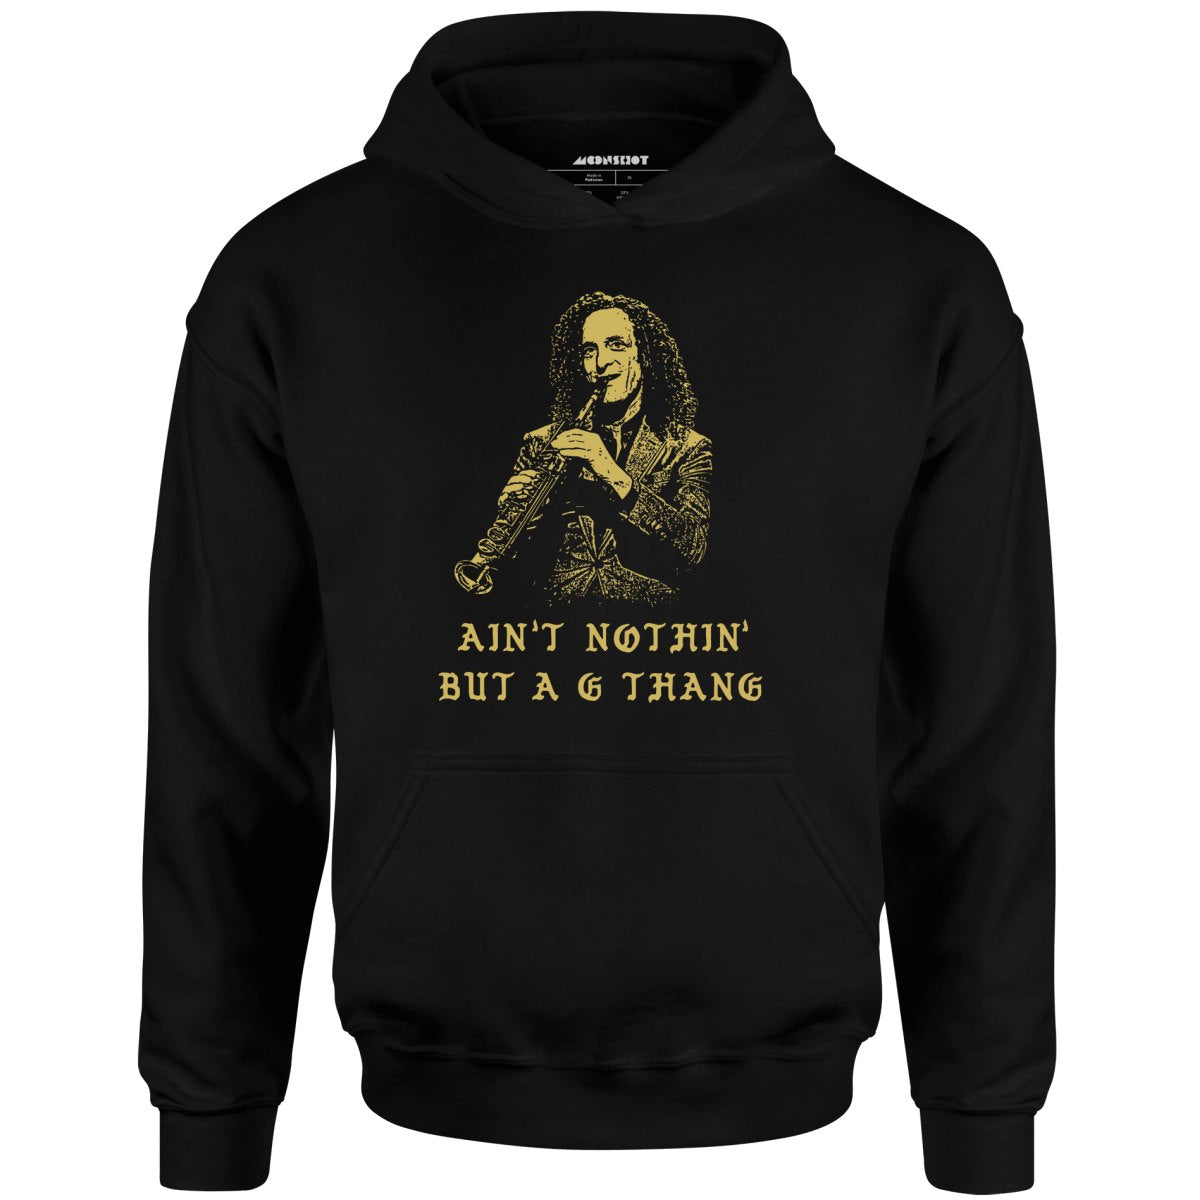 Ain't Nothin' But a G Thang - Unisex Hoodie